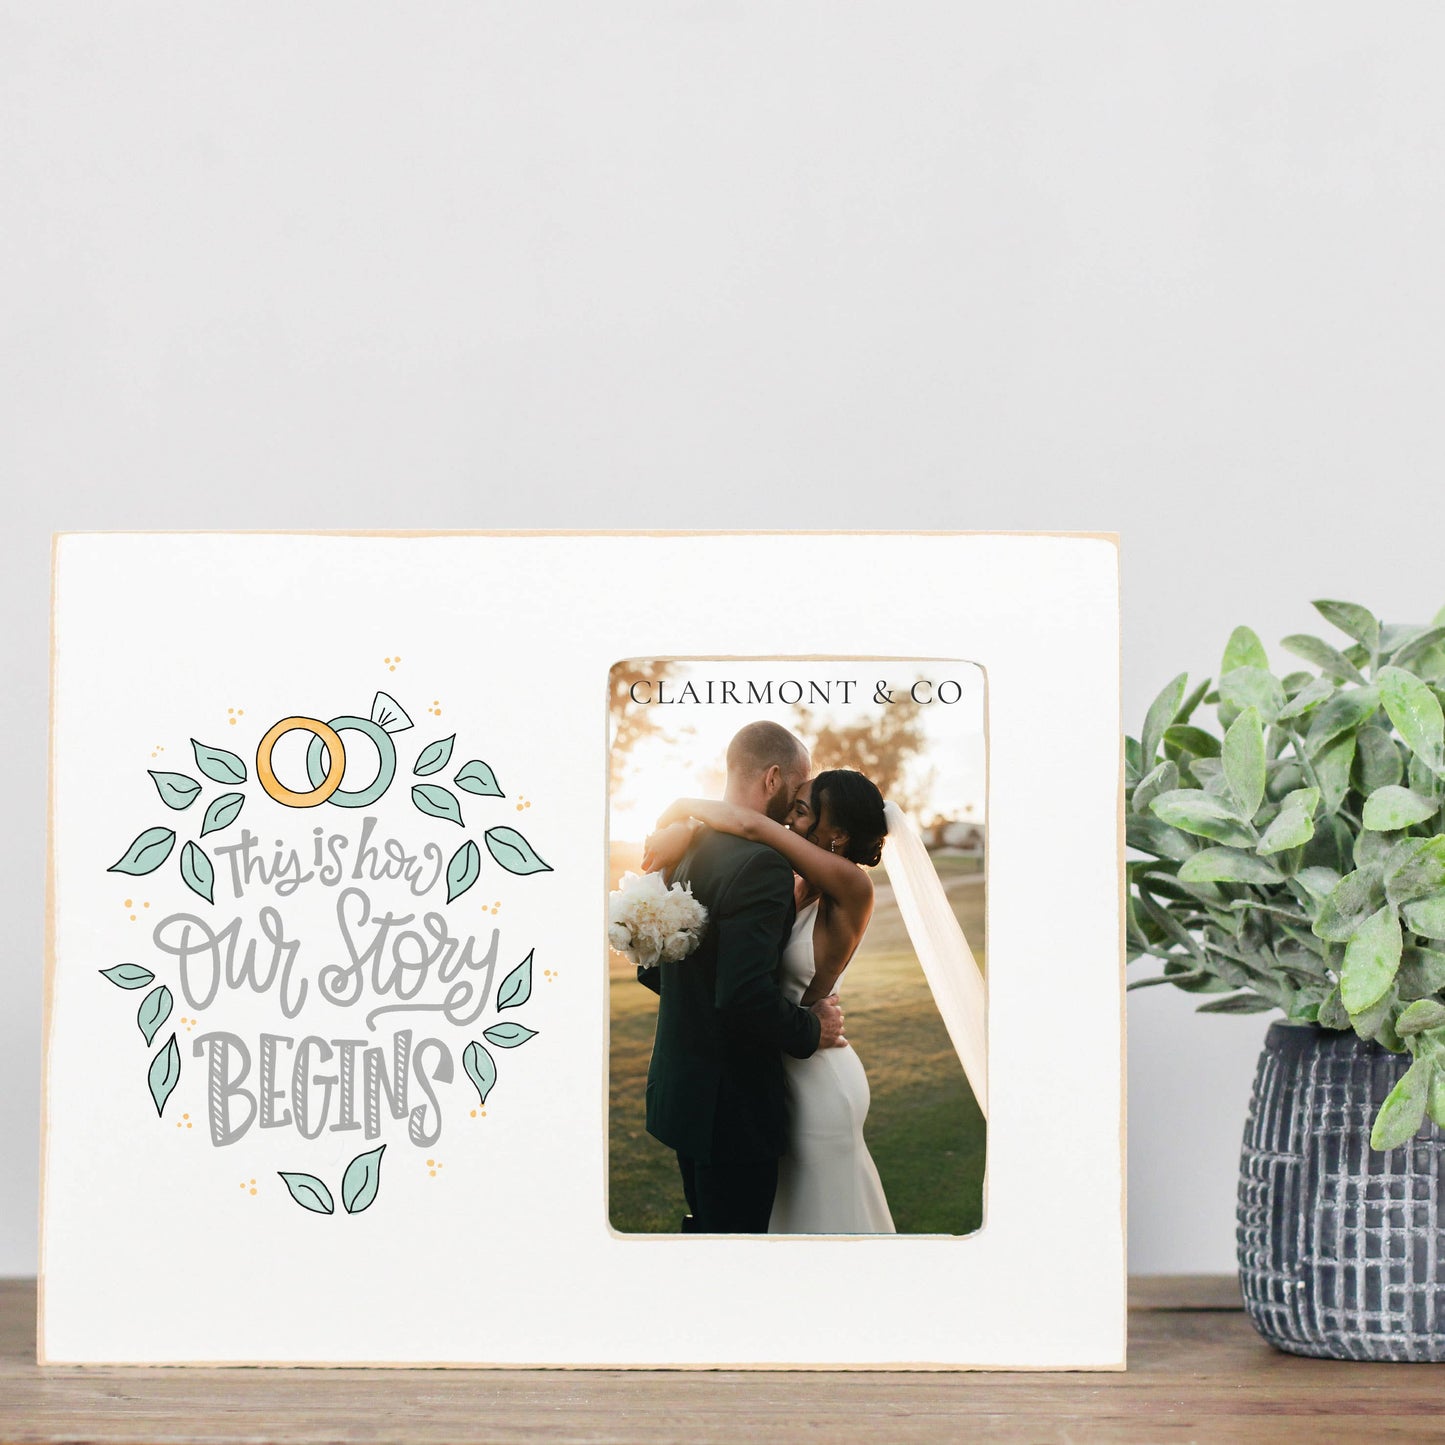 How Our Story Begins Picture Frame